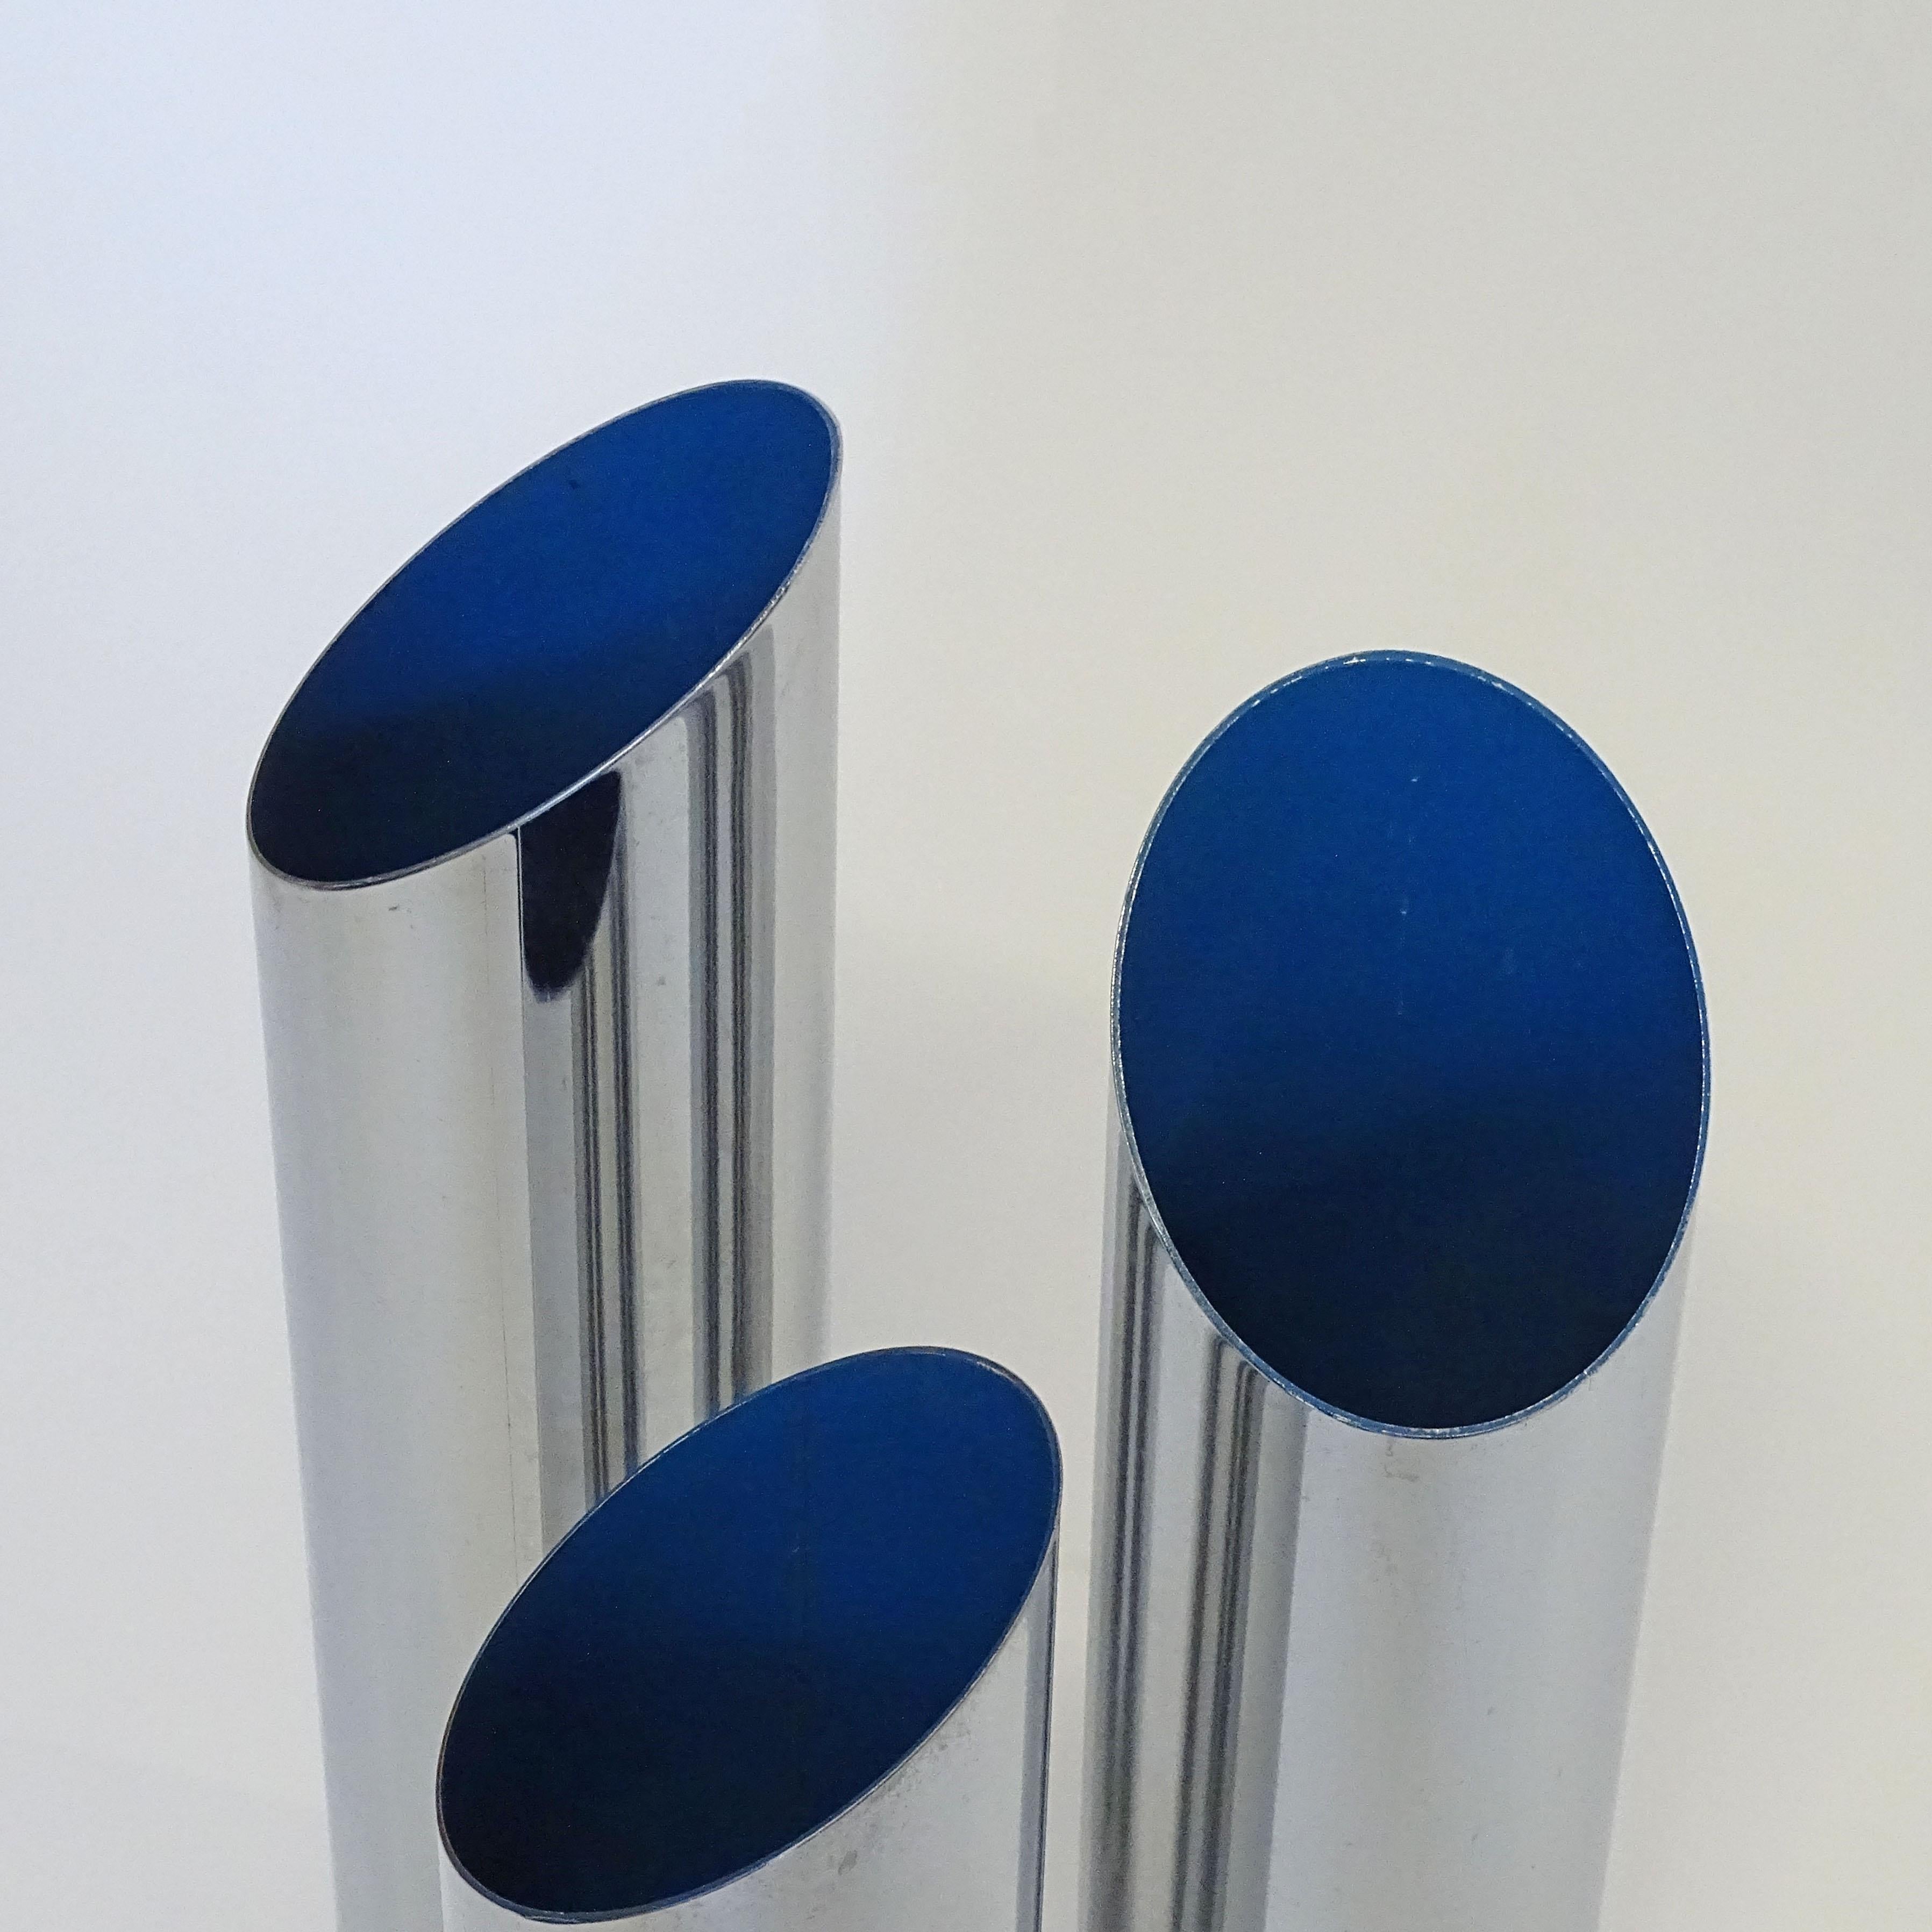 A splendid Italian 1950s set of three diagonally cut umbrella stand in Chrome and Electric Blue paint used together to make a single umbrella Stand.
